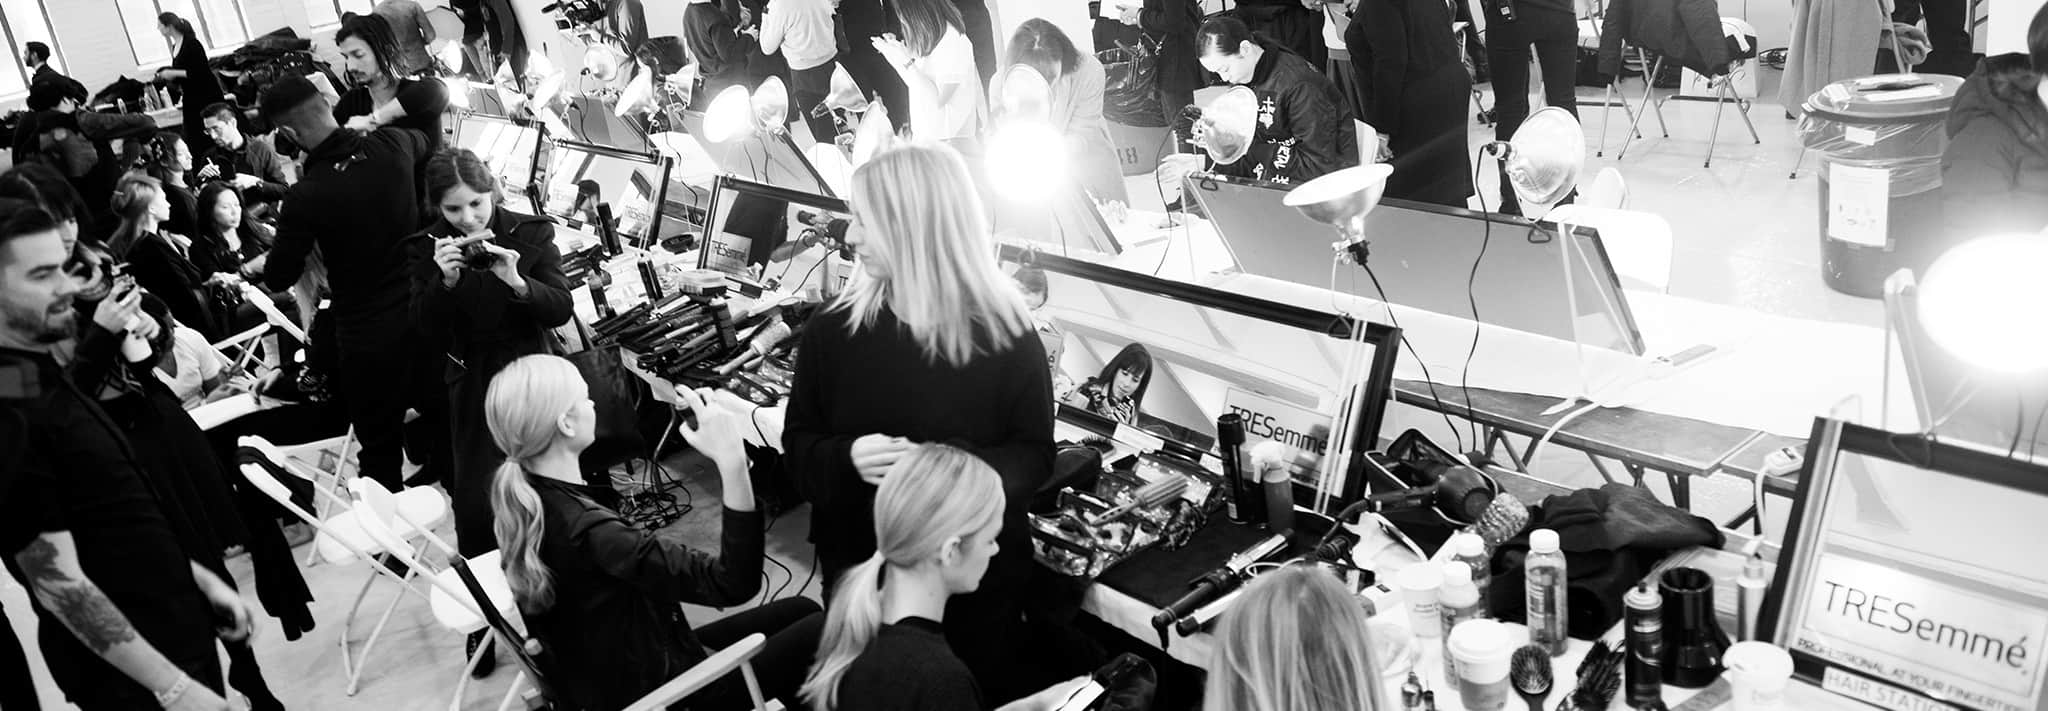 Black and white shot of a busy backstage area featuring models sitting in front of mirrors with hairstylists, photographers and styling tools and hair products